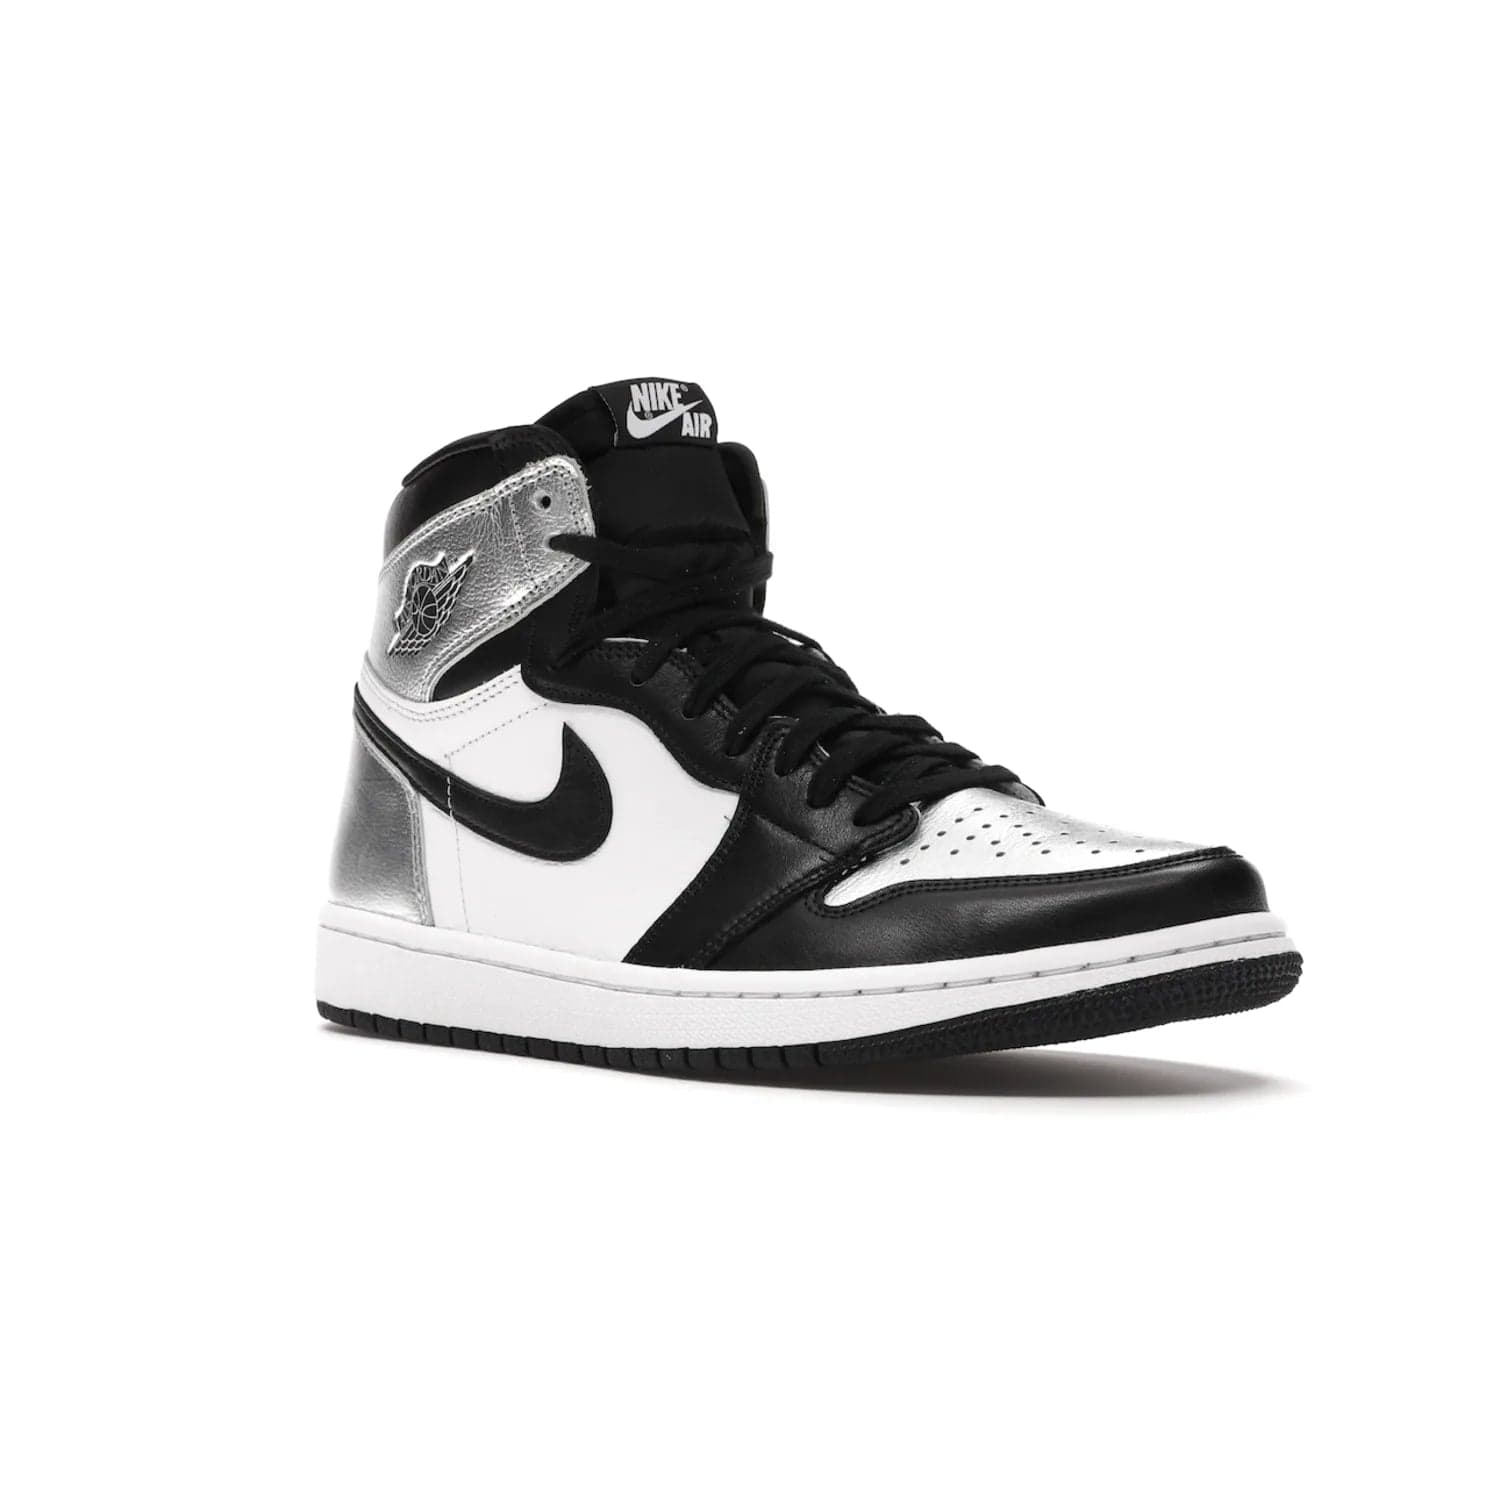 Jordan 1 Retro High Silver Toe (Women's) - Image 5 - Only at www.BallersClubKickz.com - Introducing the Jordan 1 Retro High Silver Toe (Women's): an updated spin on the iconic 'Black Toe' theme. Featuring white & black leather and silver patent leather construction. Nike Air branding, Air Jordan Wings logo, and white/black sole finish give a classic look. The perfect addition to an on-trend streetwear look. Available in classic black & white, this Jordan 1 is an instant classic. Released in February 202